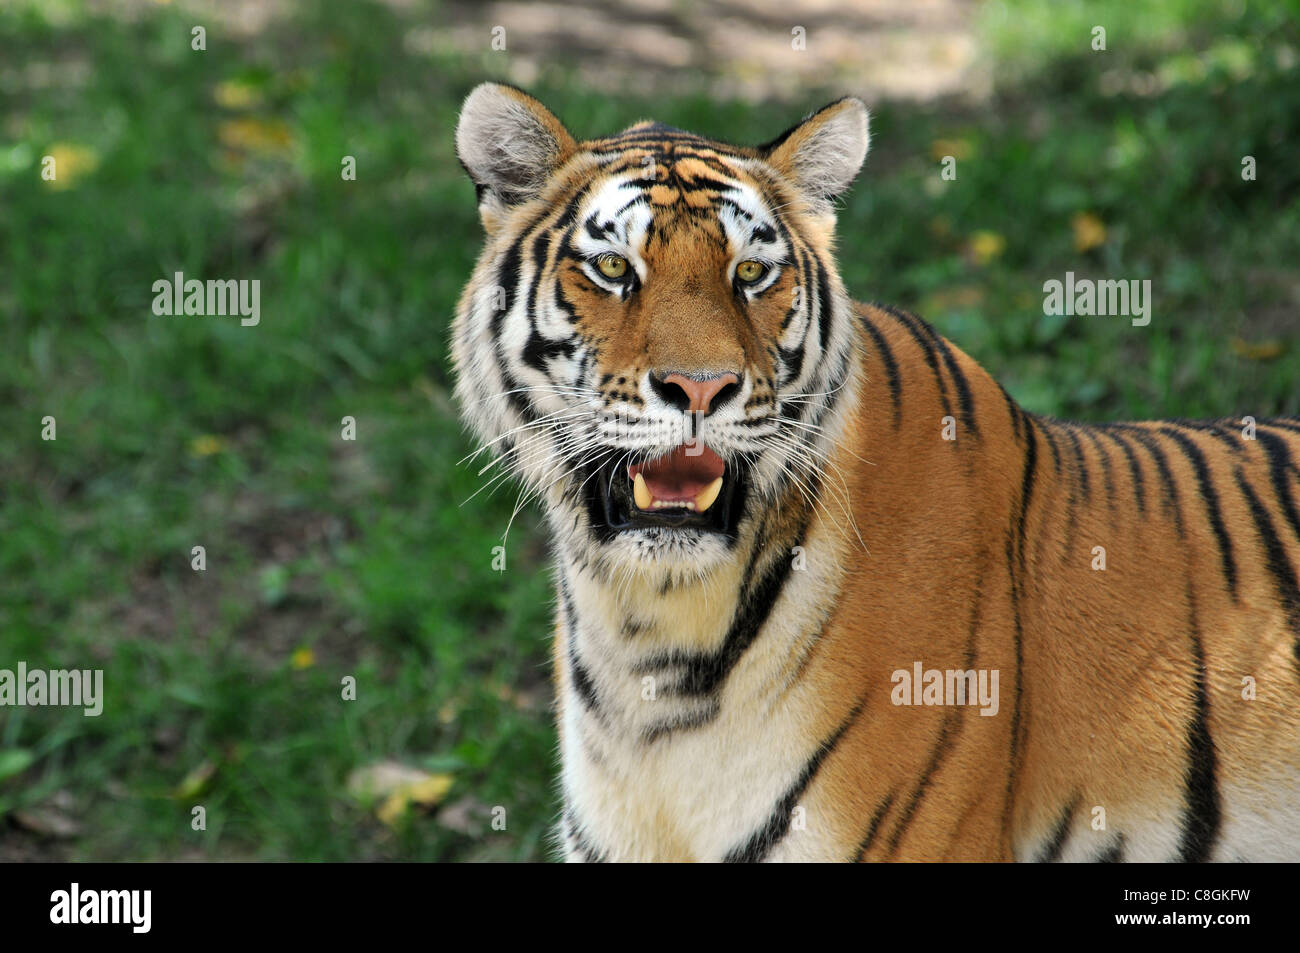 Portrait of Tiger with background out of focus Stock Photo